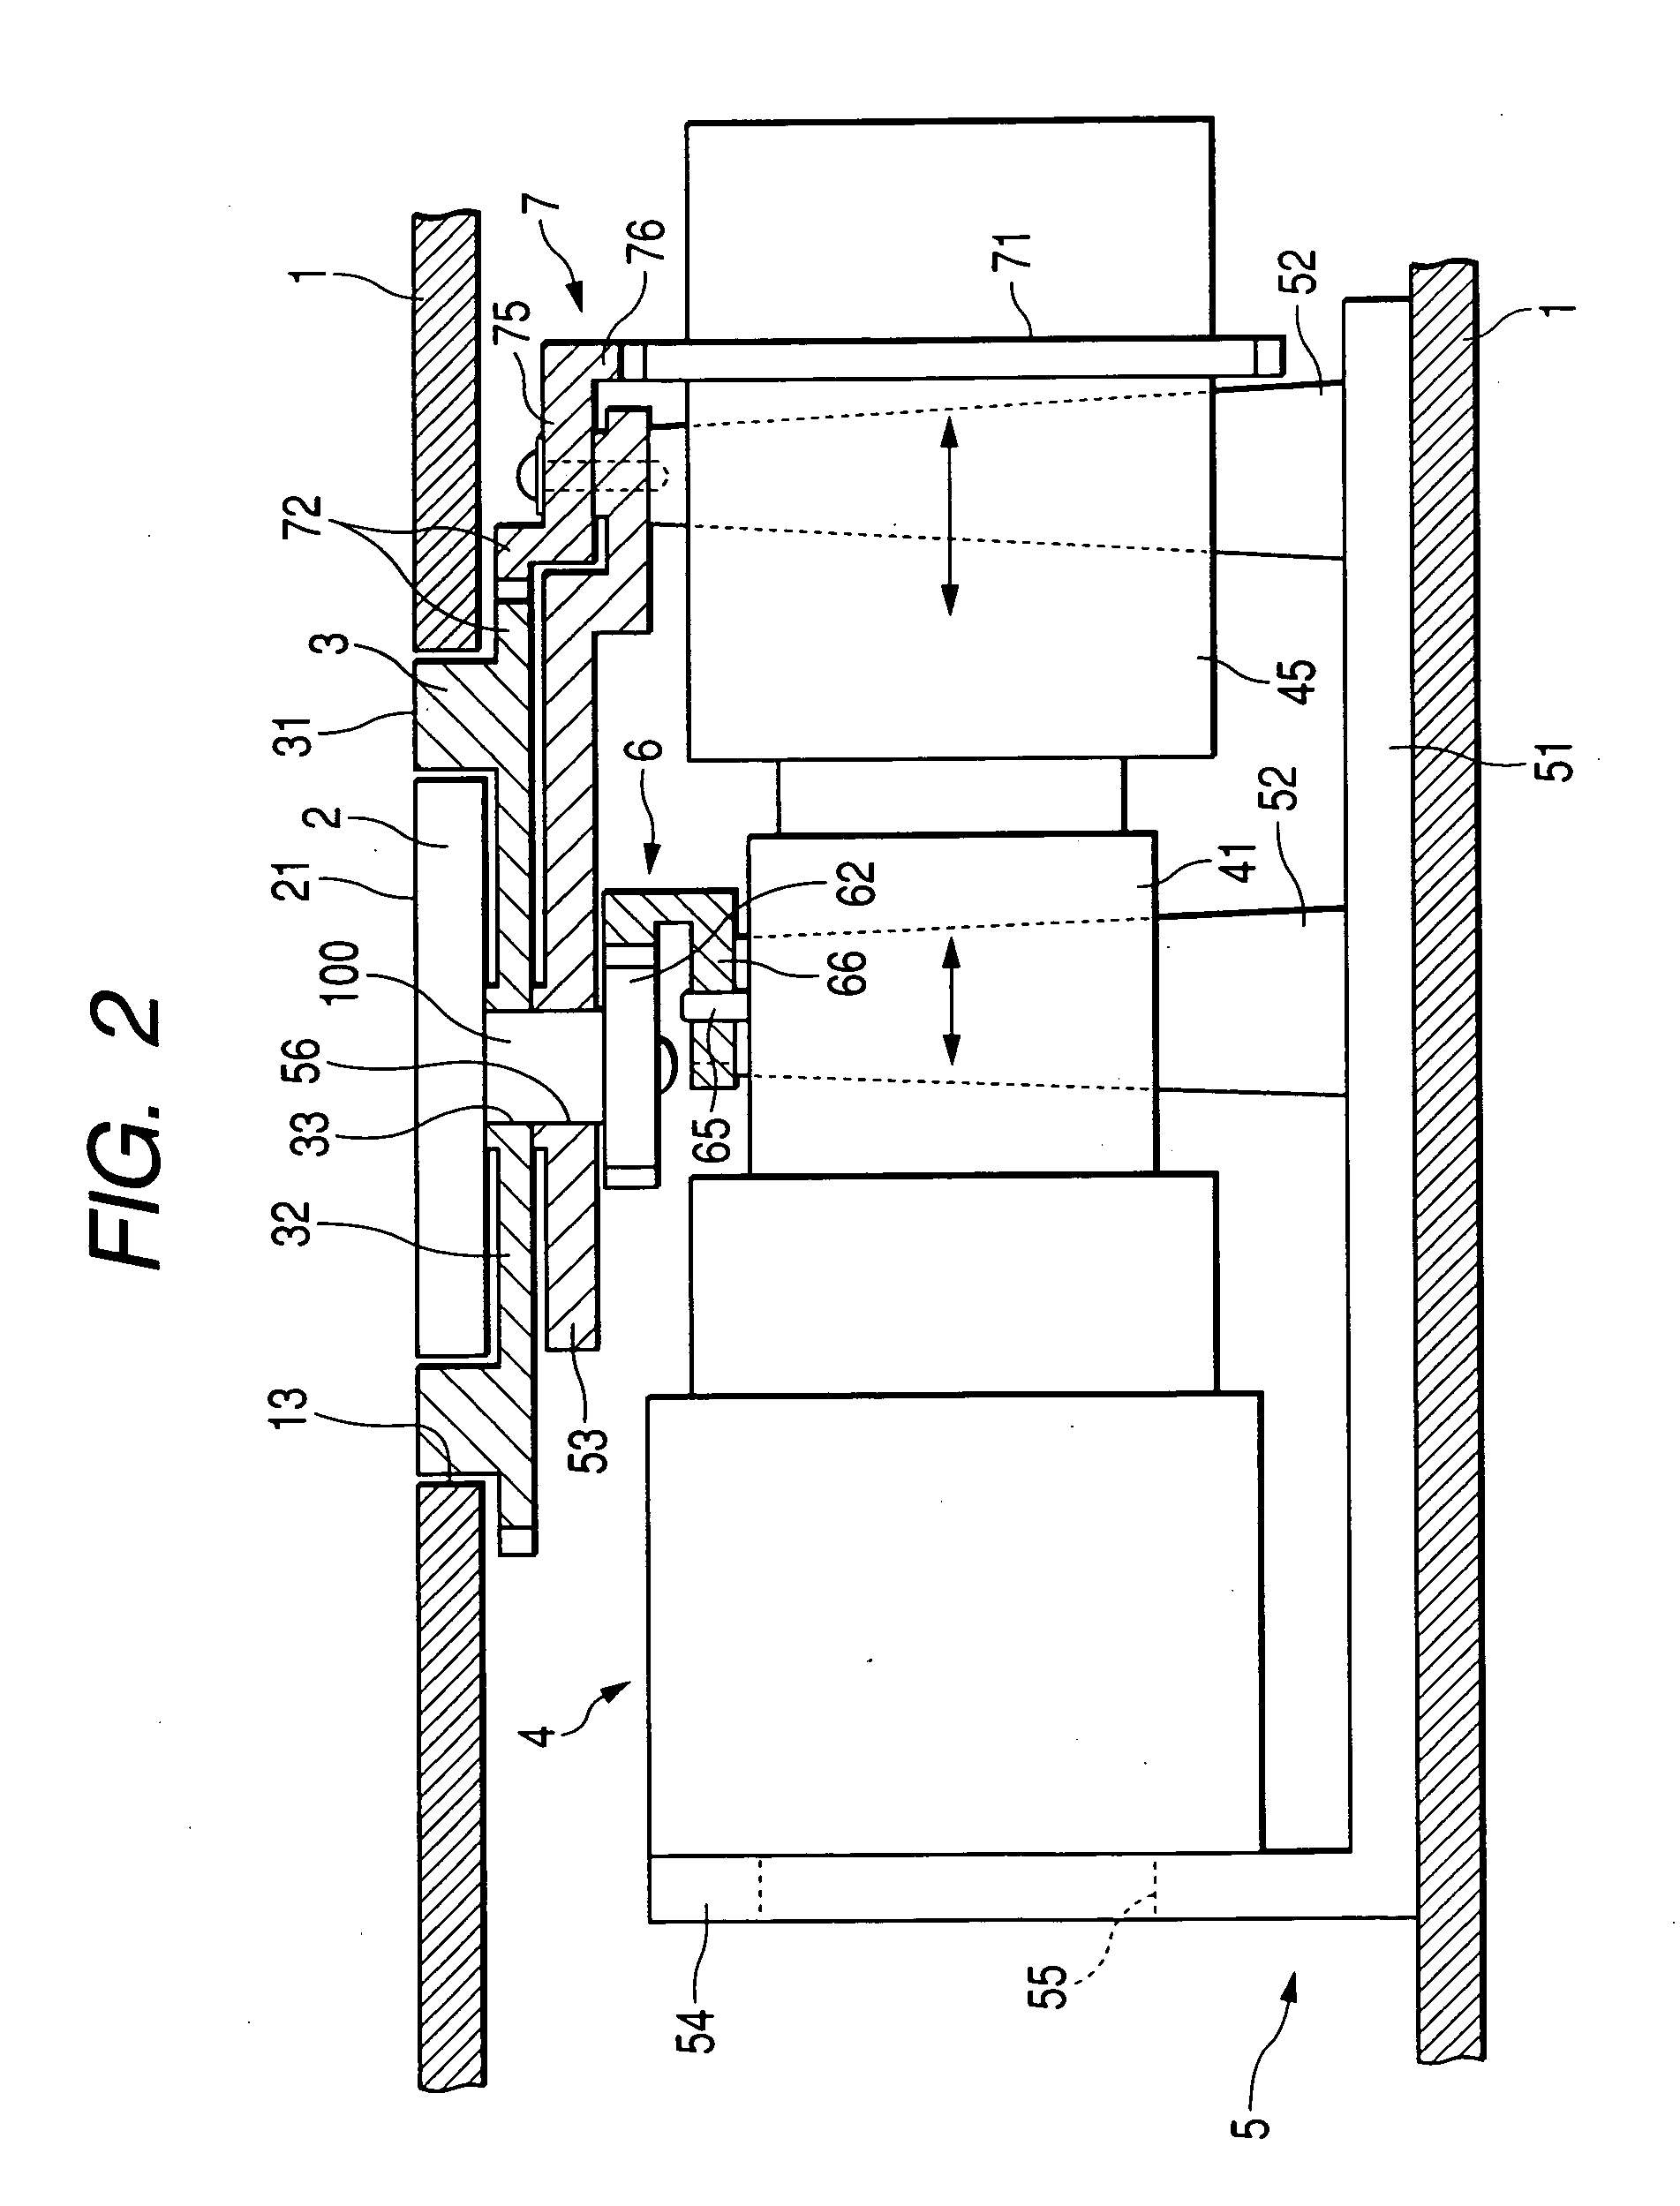 Connecting structure for connecting together rotation operation shaft and operation knob of electric apparatus